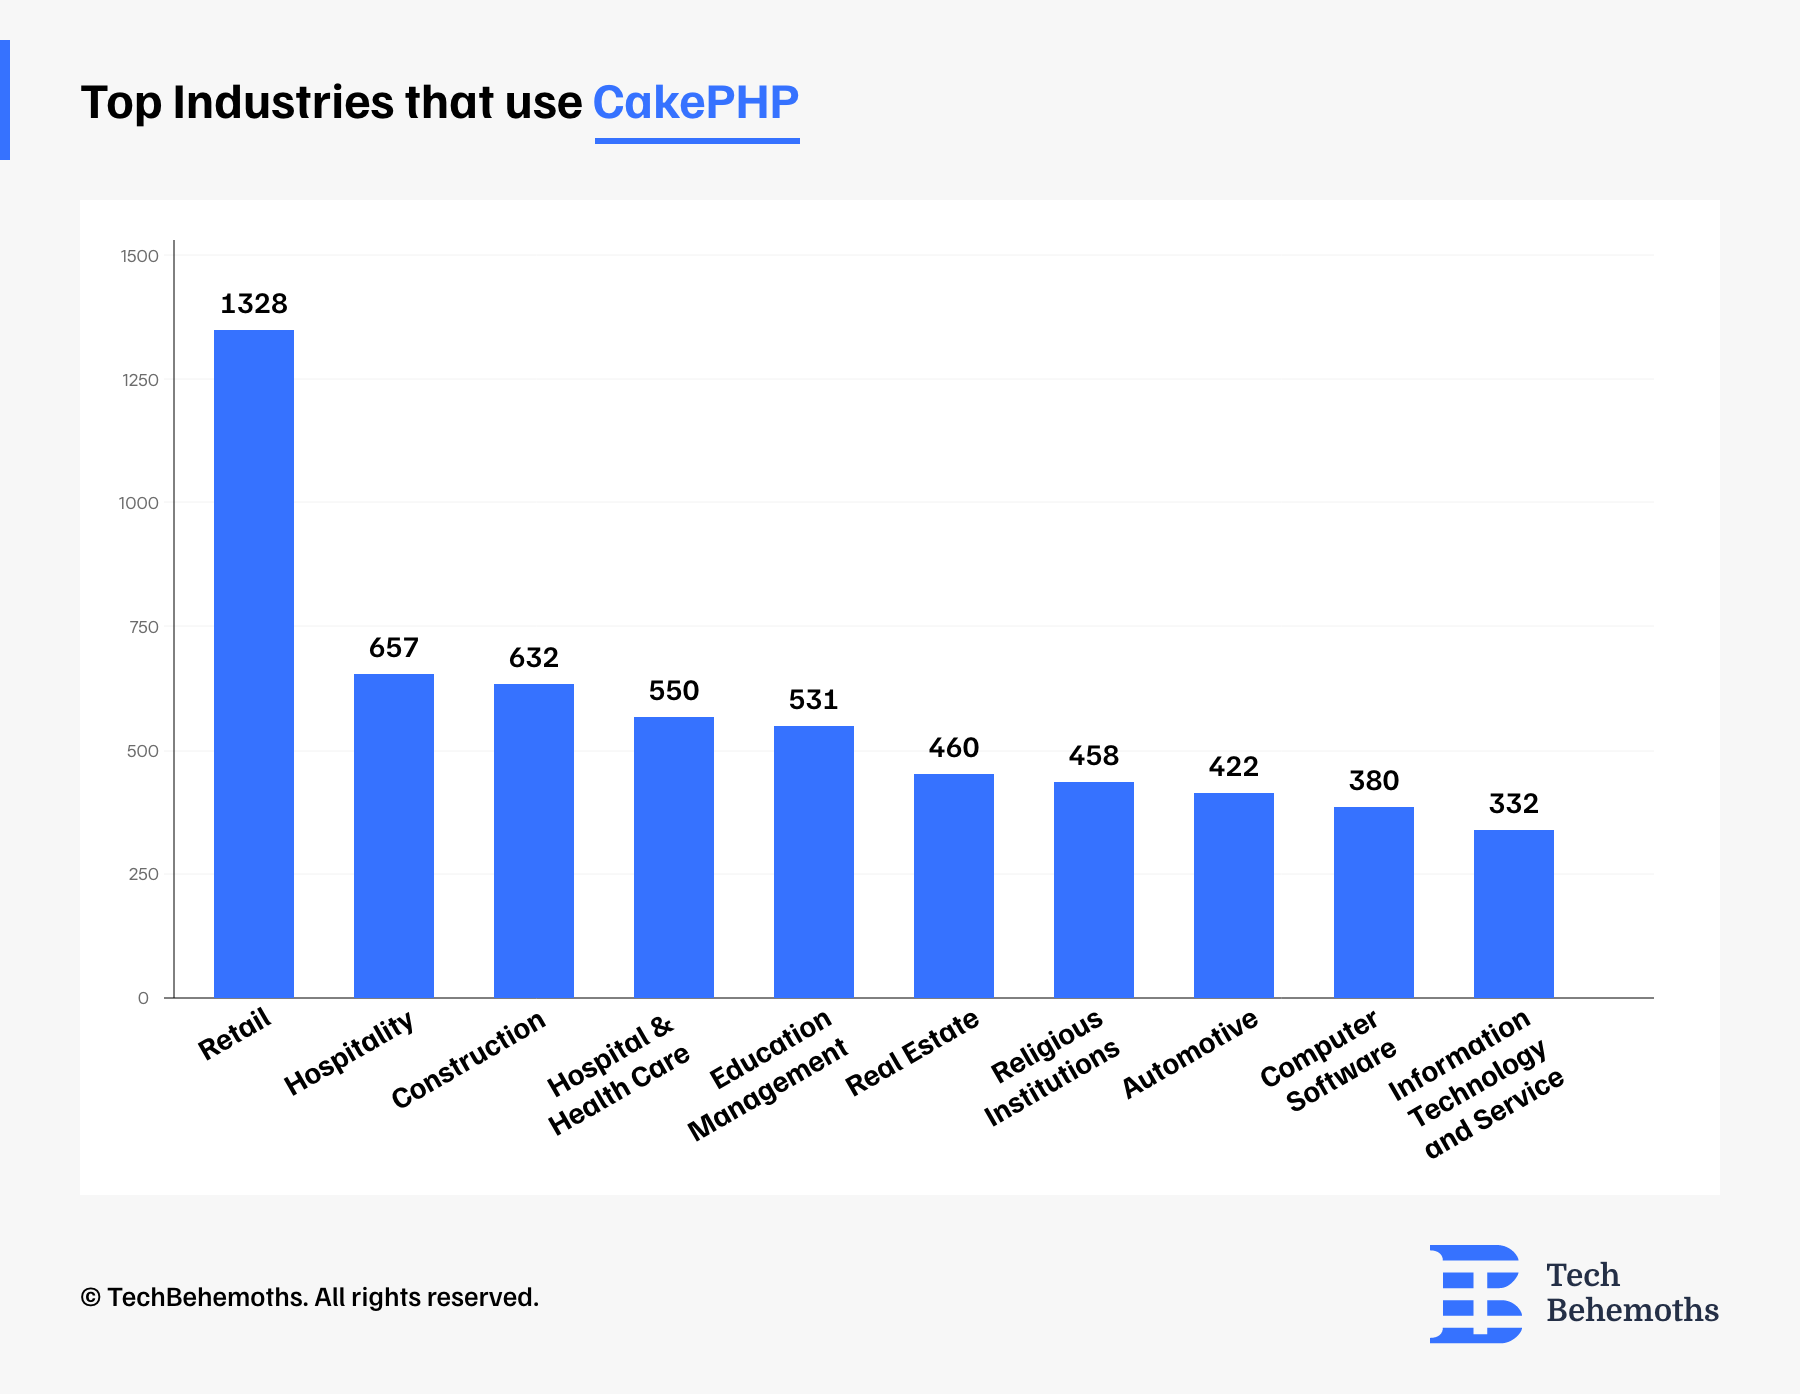 Top Industries that use CakePHP